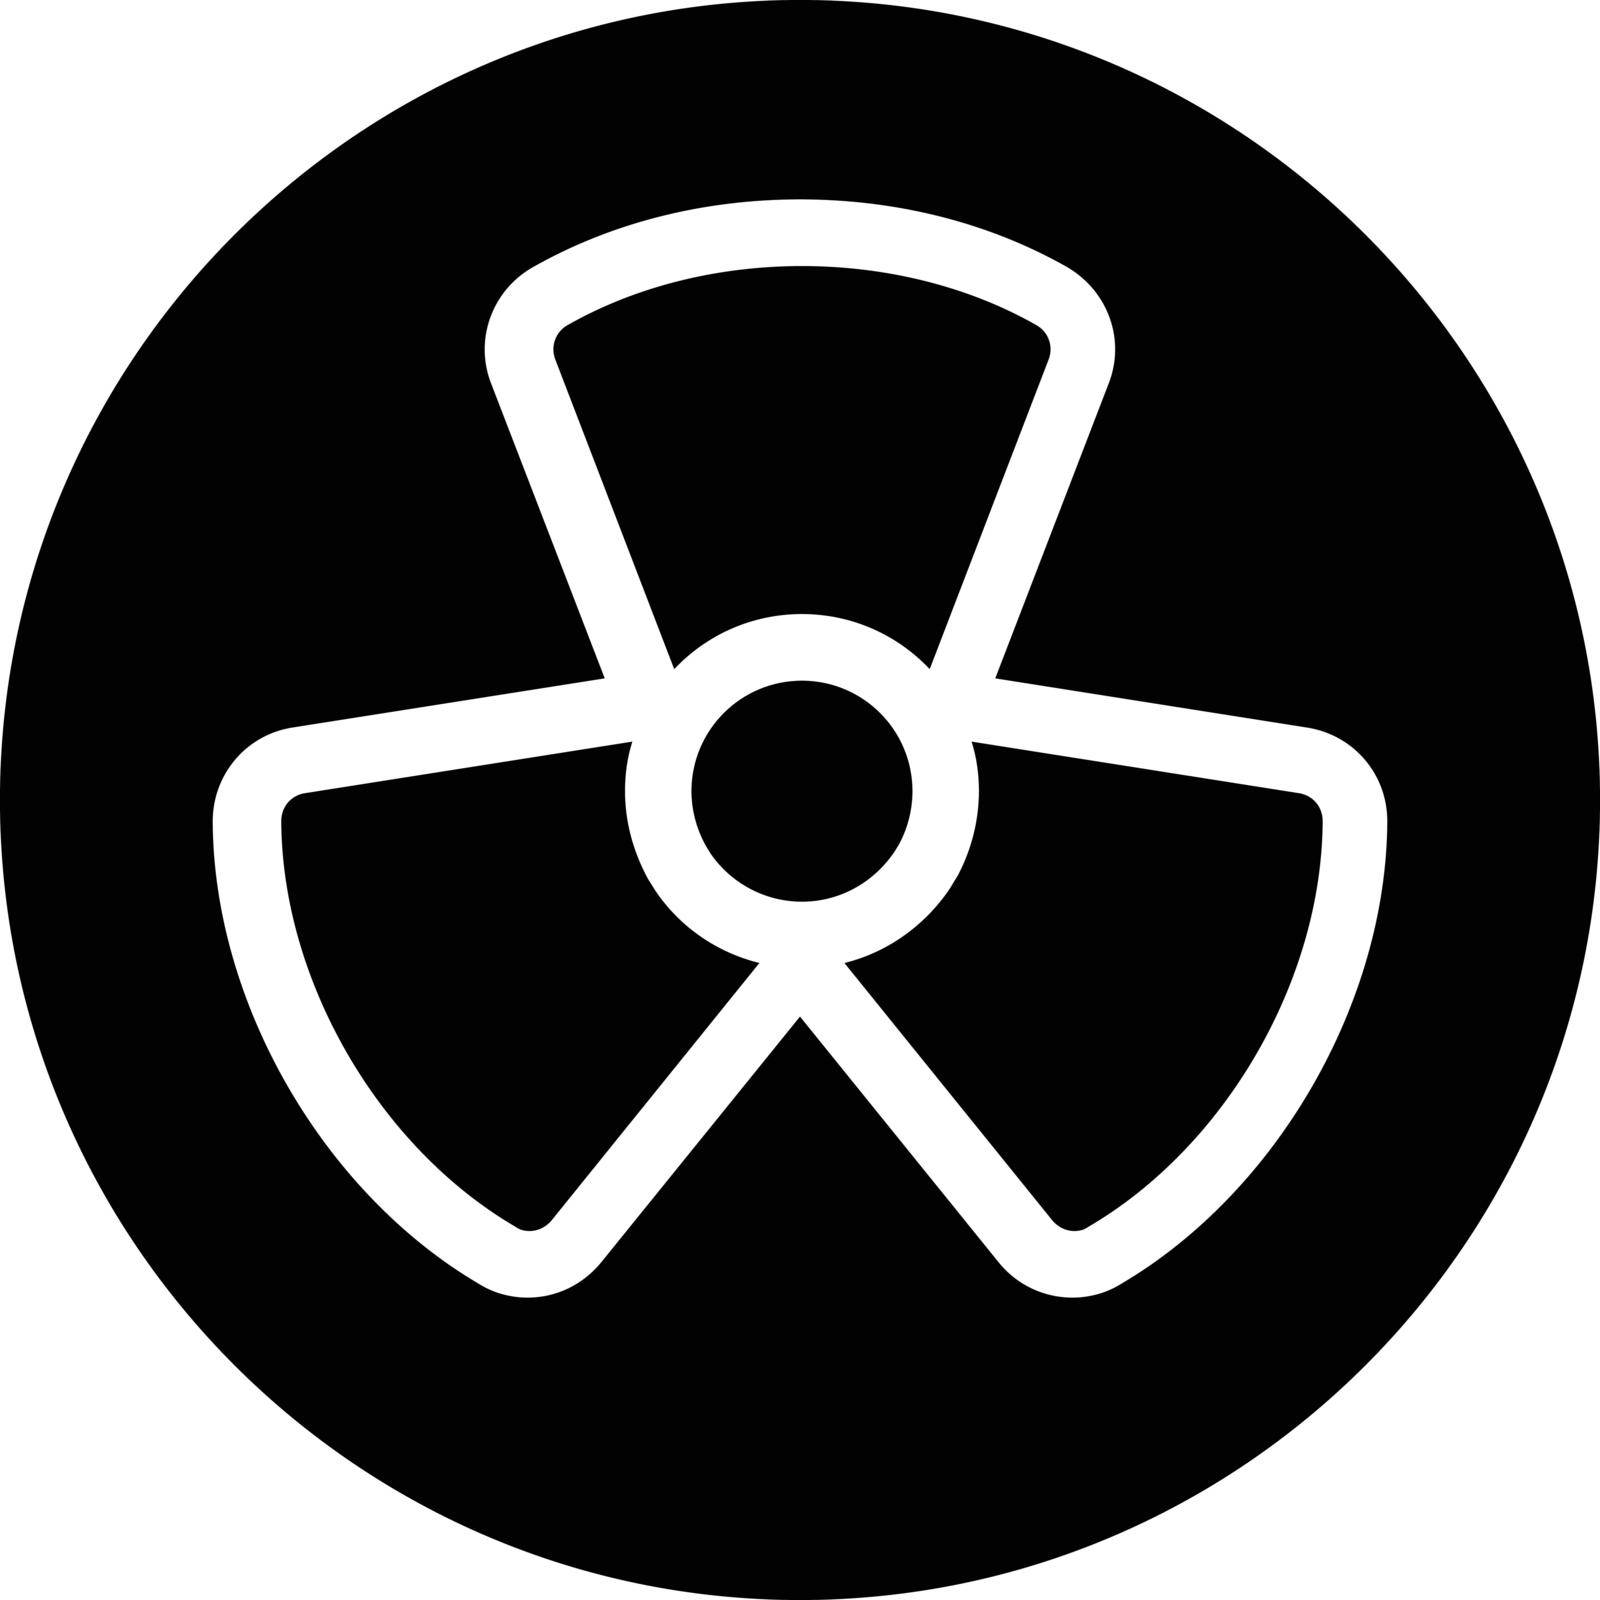 nuclear fan Vector illustration on a transparent background.Premium quality symbols.Glyphs vector icon for concept and graphic design.